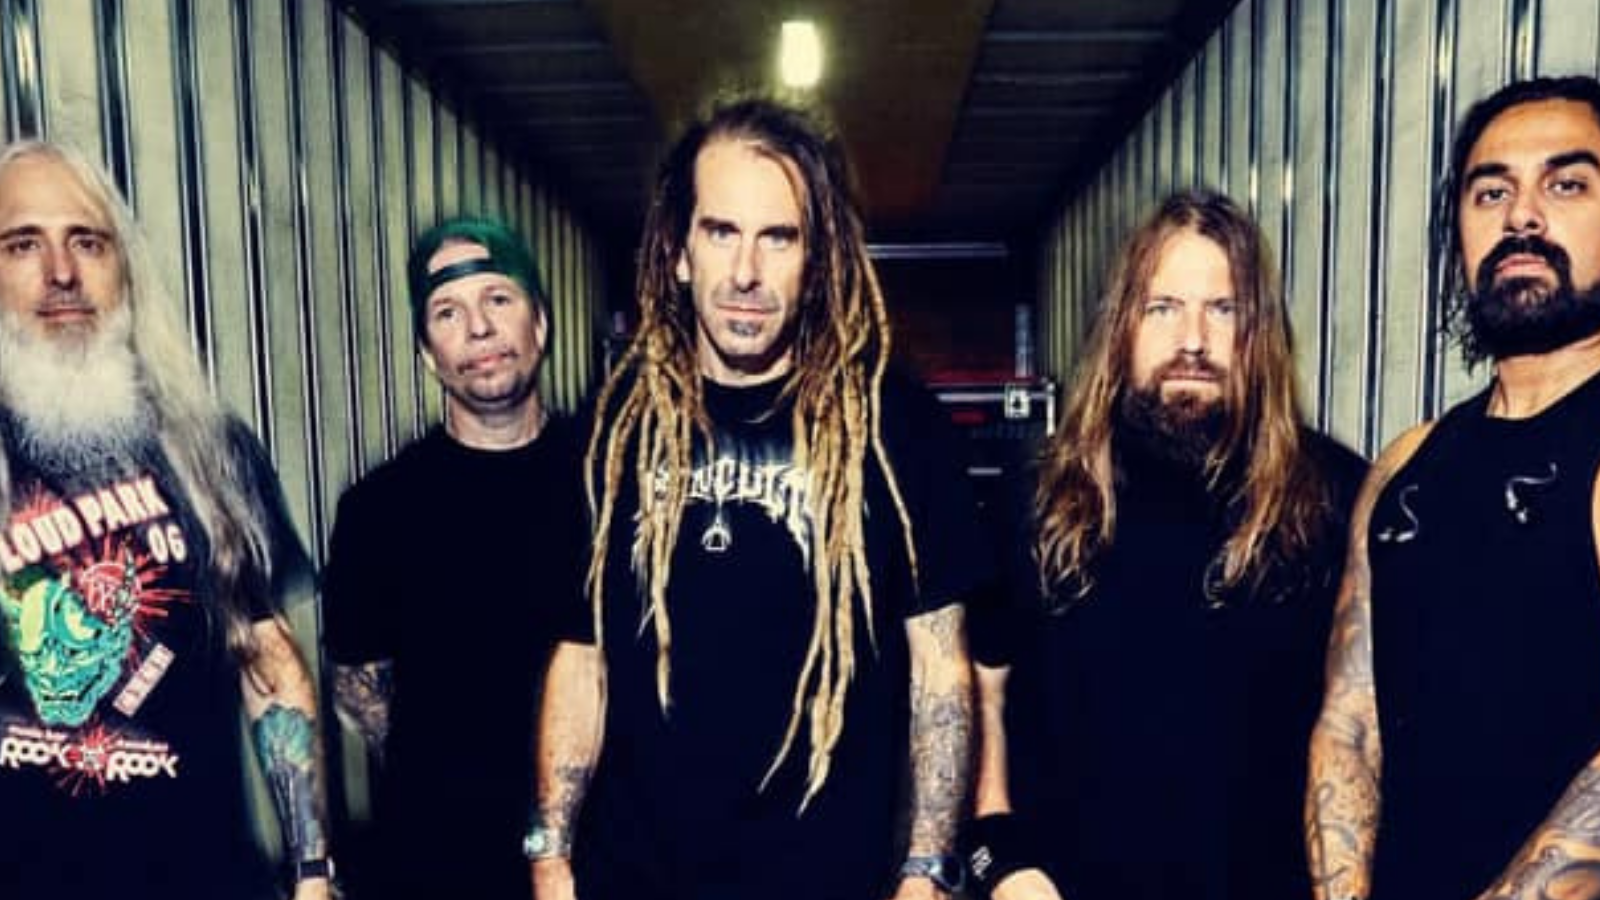 Read more about the article LAMB OF GOD release music video for “Ditch” – New album out now.